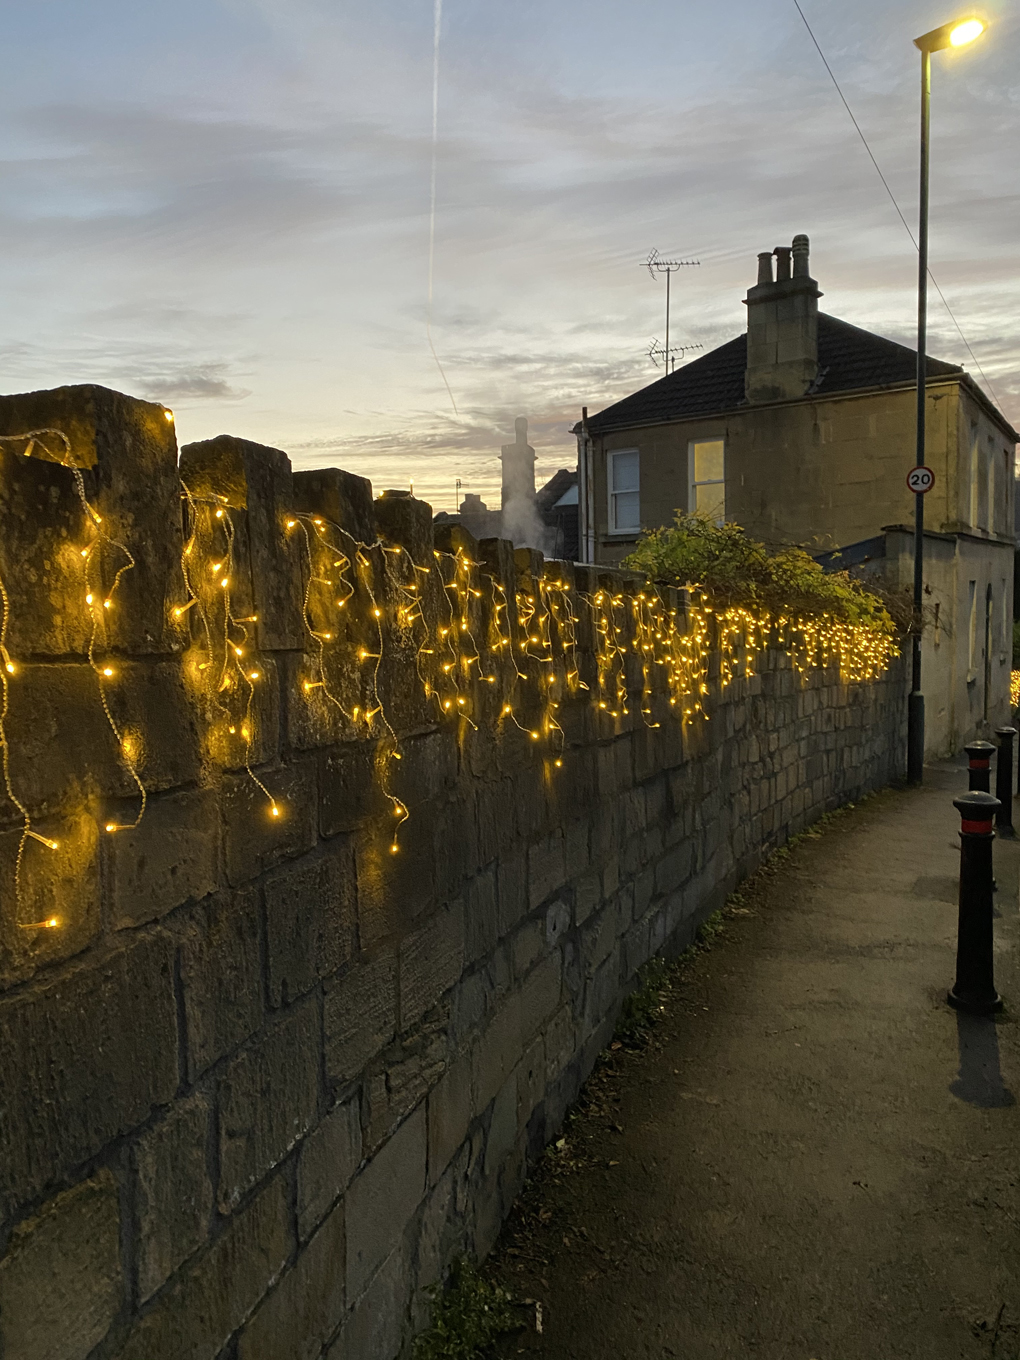 A stone wall alongside a road covered in small lights. The lights give off a warm glow.